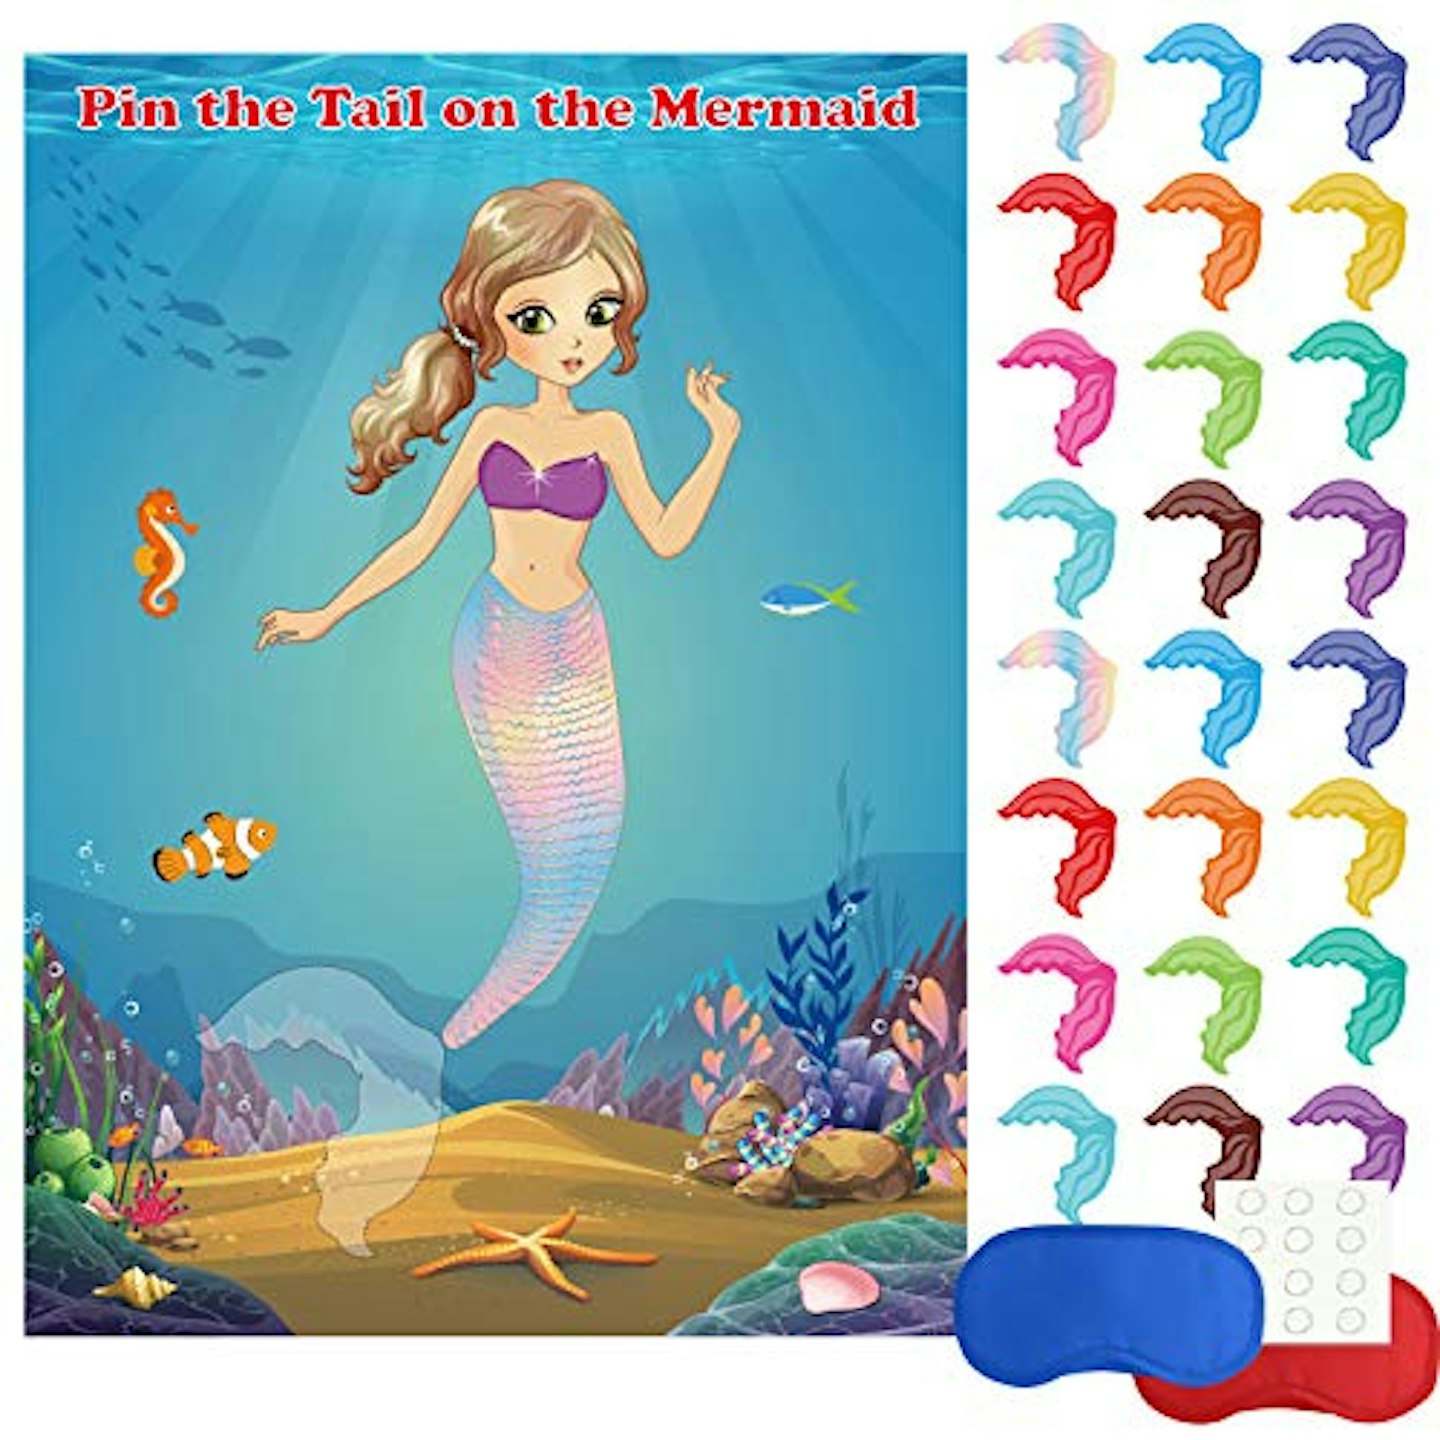 Mermaid Pin the Tail on the Mermaid Party Game